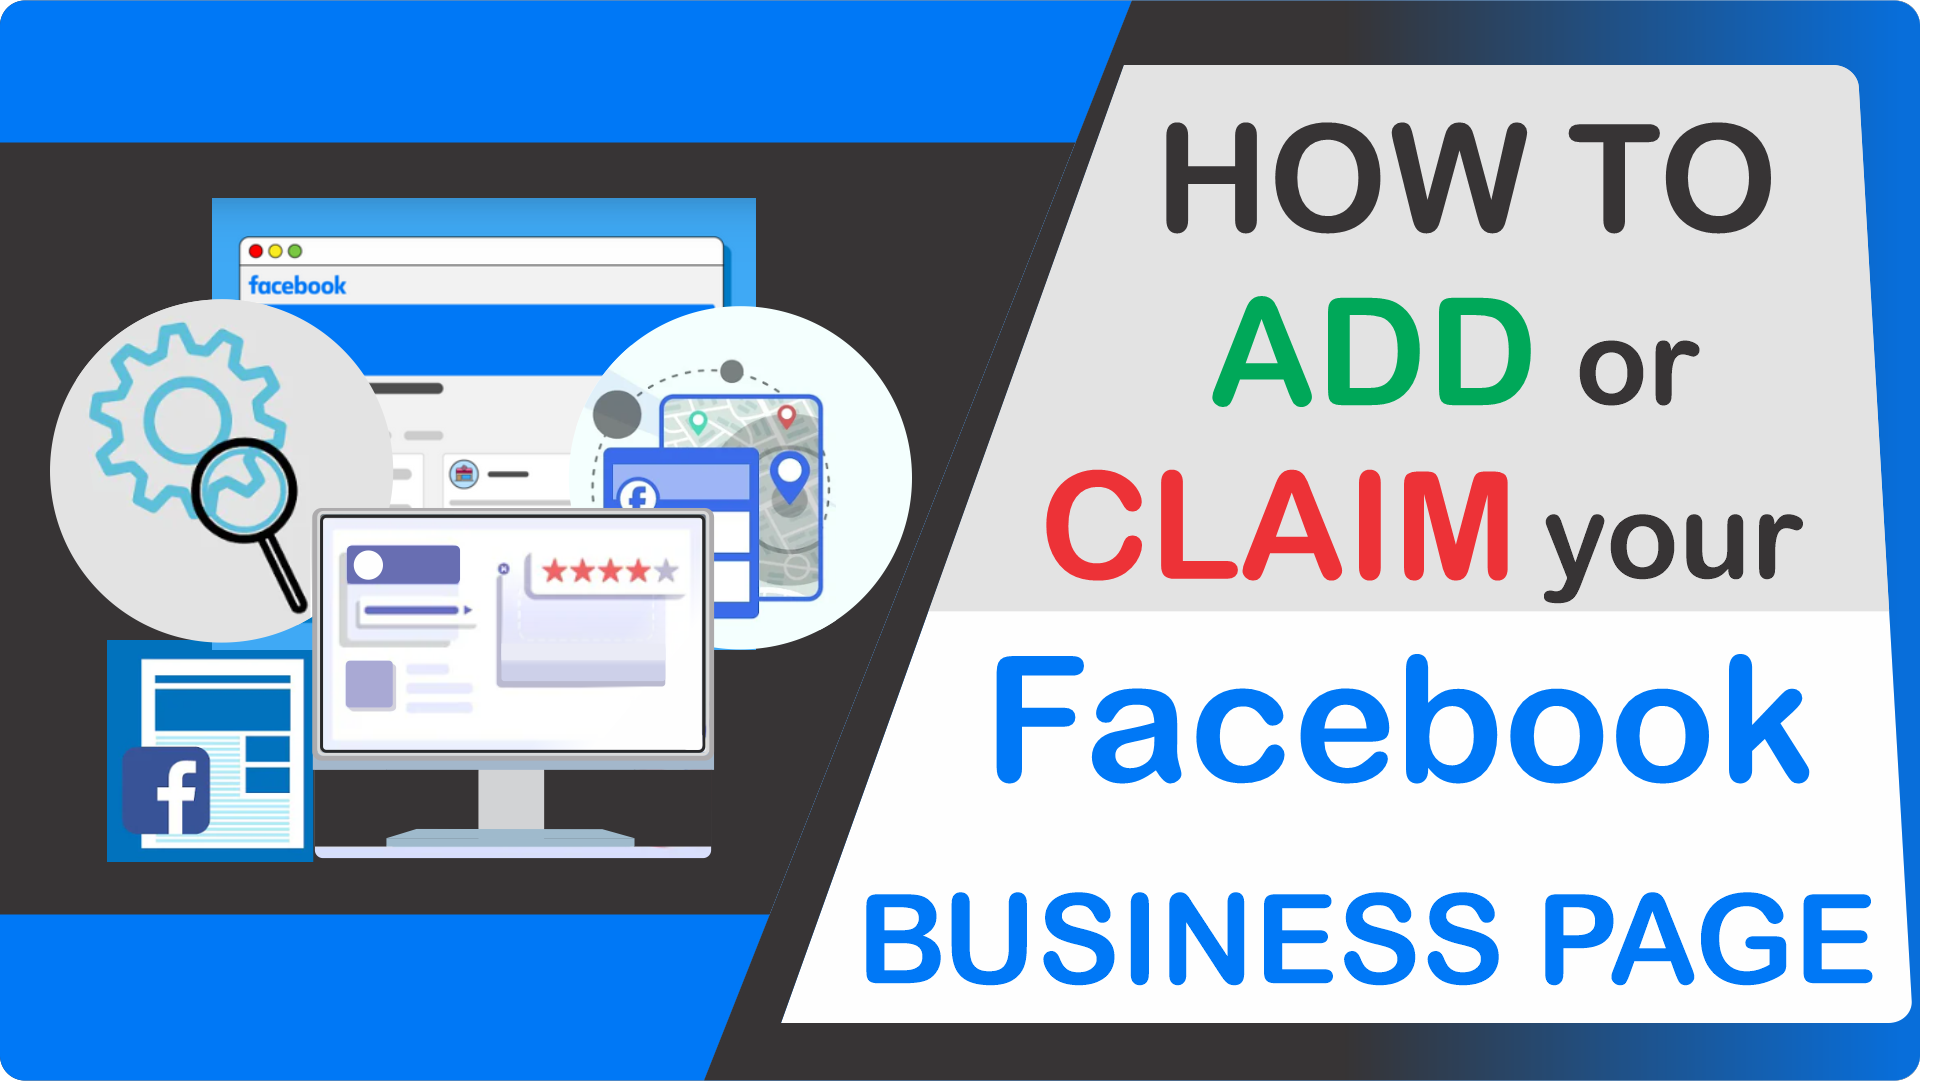 Add or Claim Your Facebook Business Page